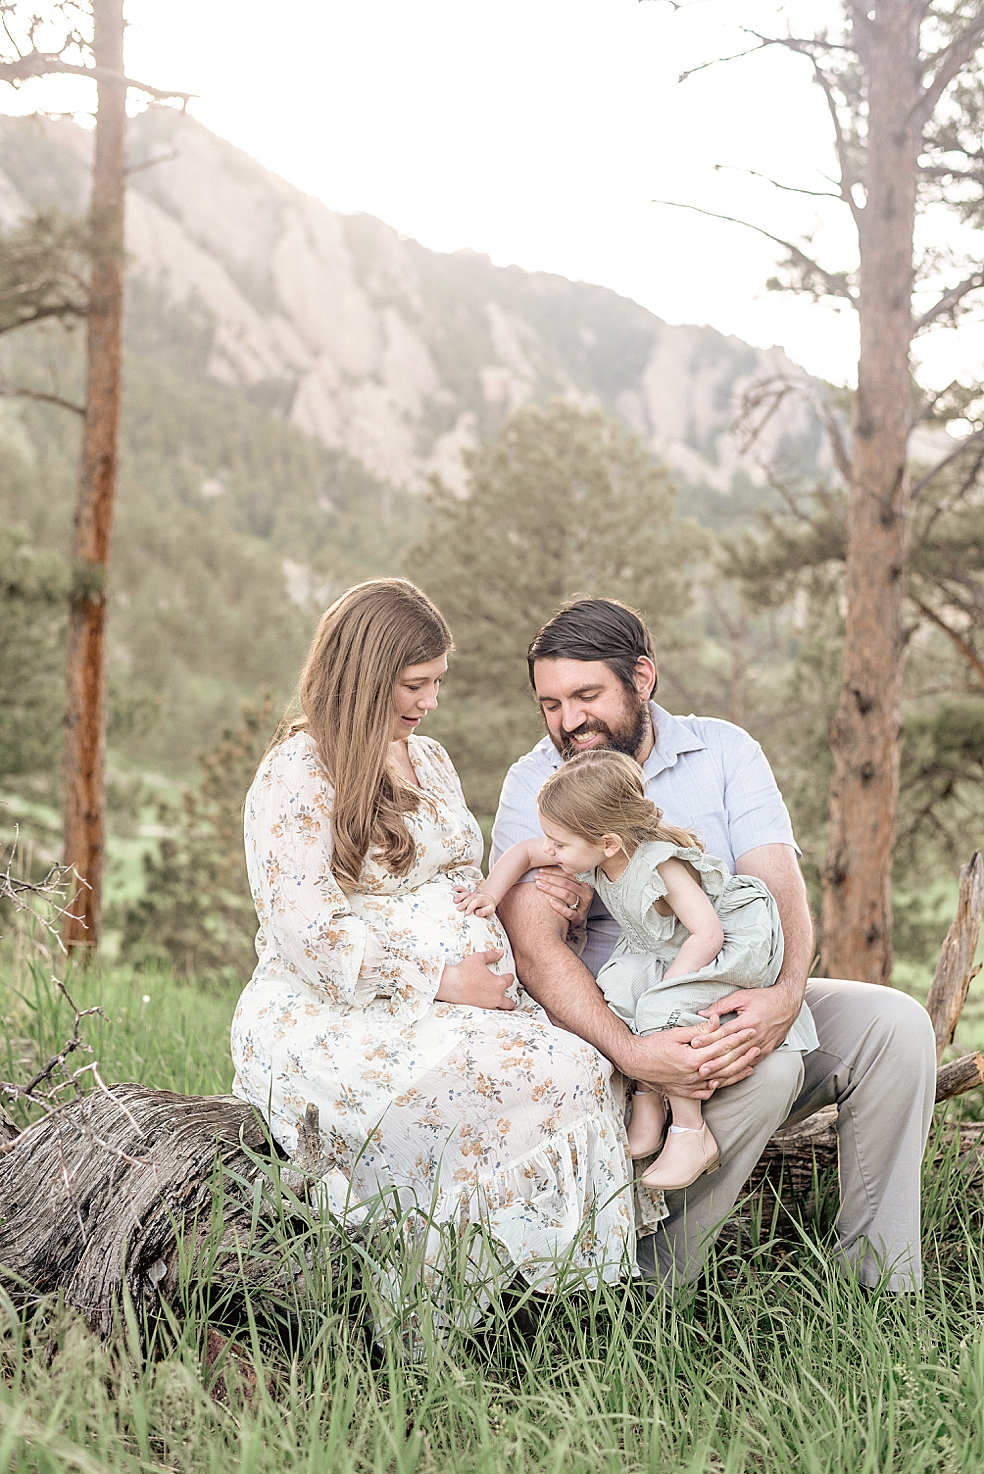 Mom and dad sitting on a log with their little girl | Photo by Jessica Lee Photography